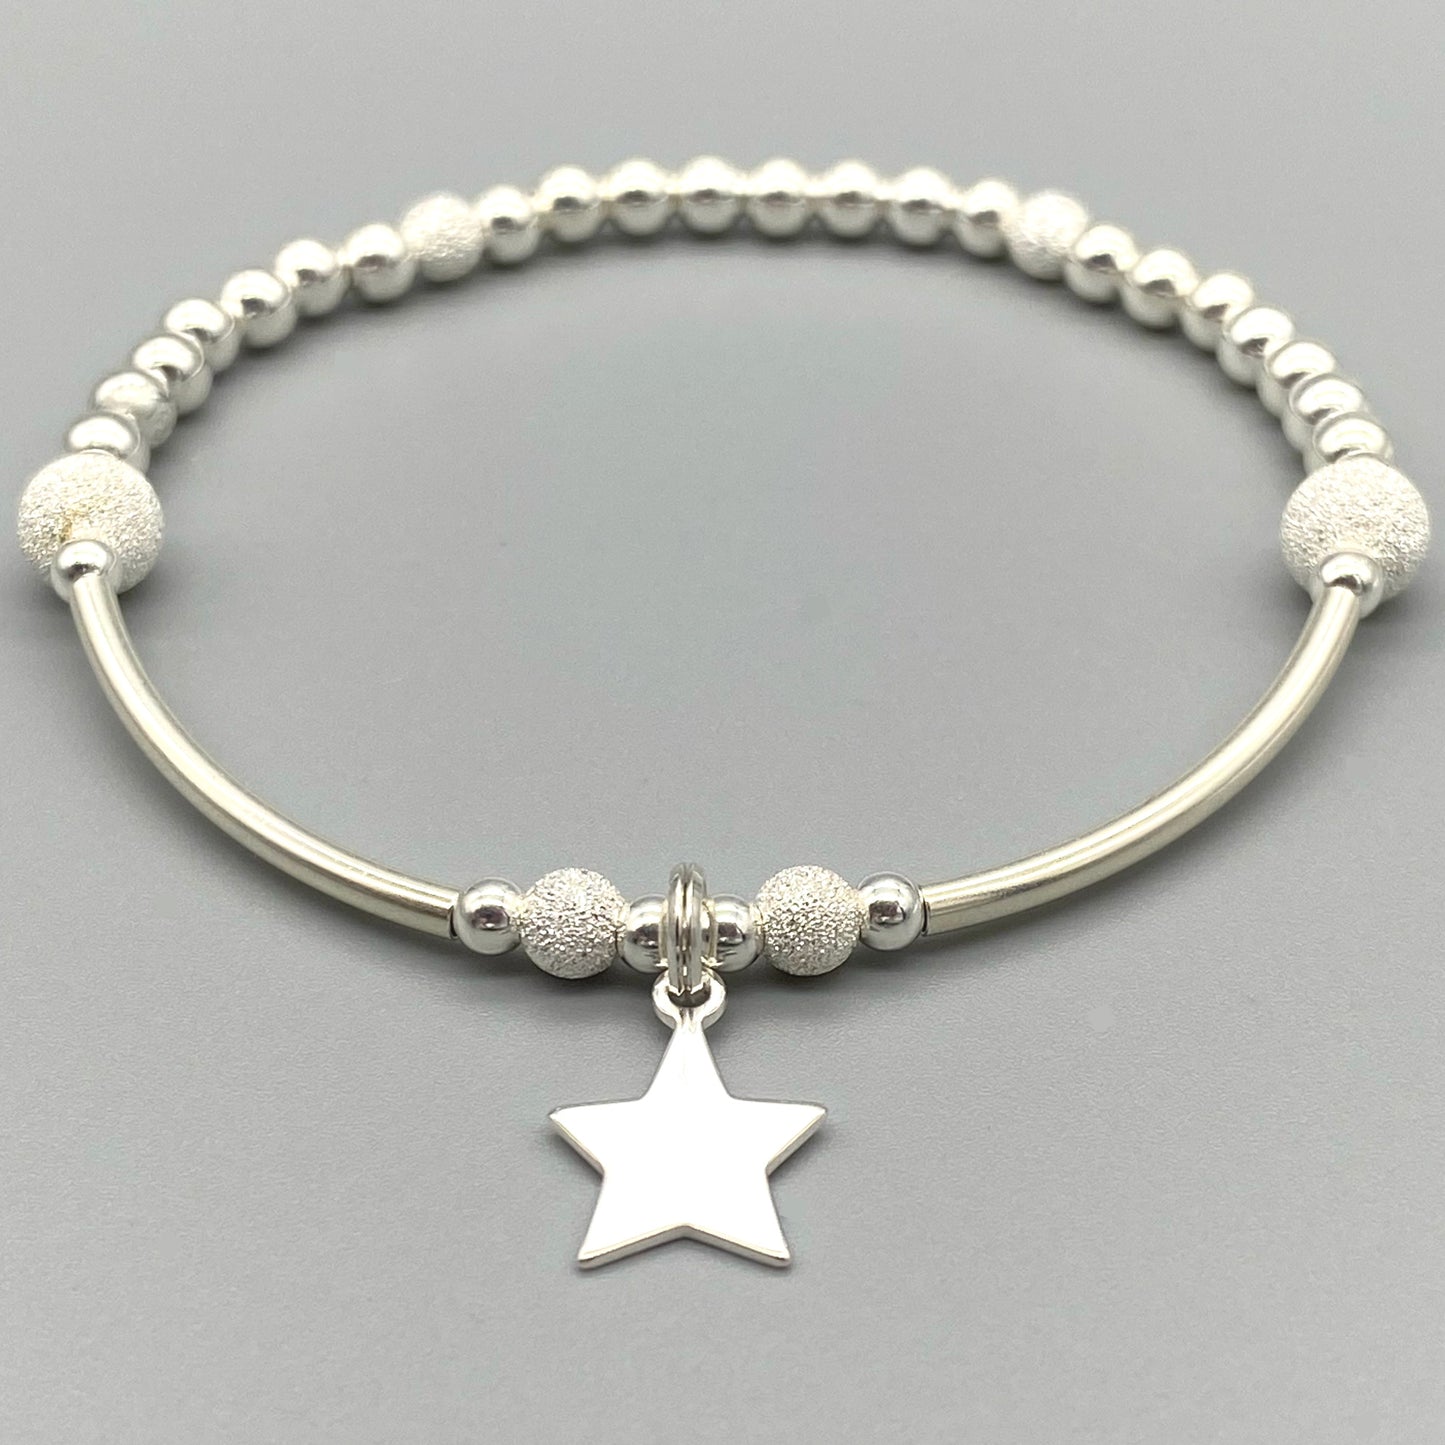 Star charm & starburst beads sterling silver stacking bracelet for her by My Silver Wish